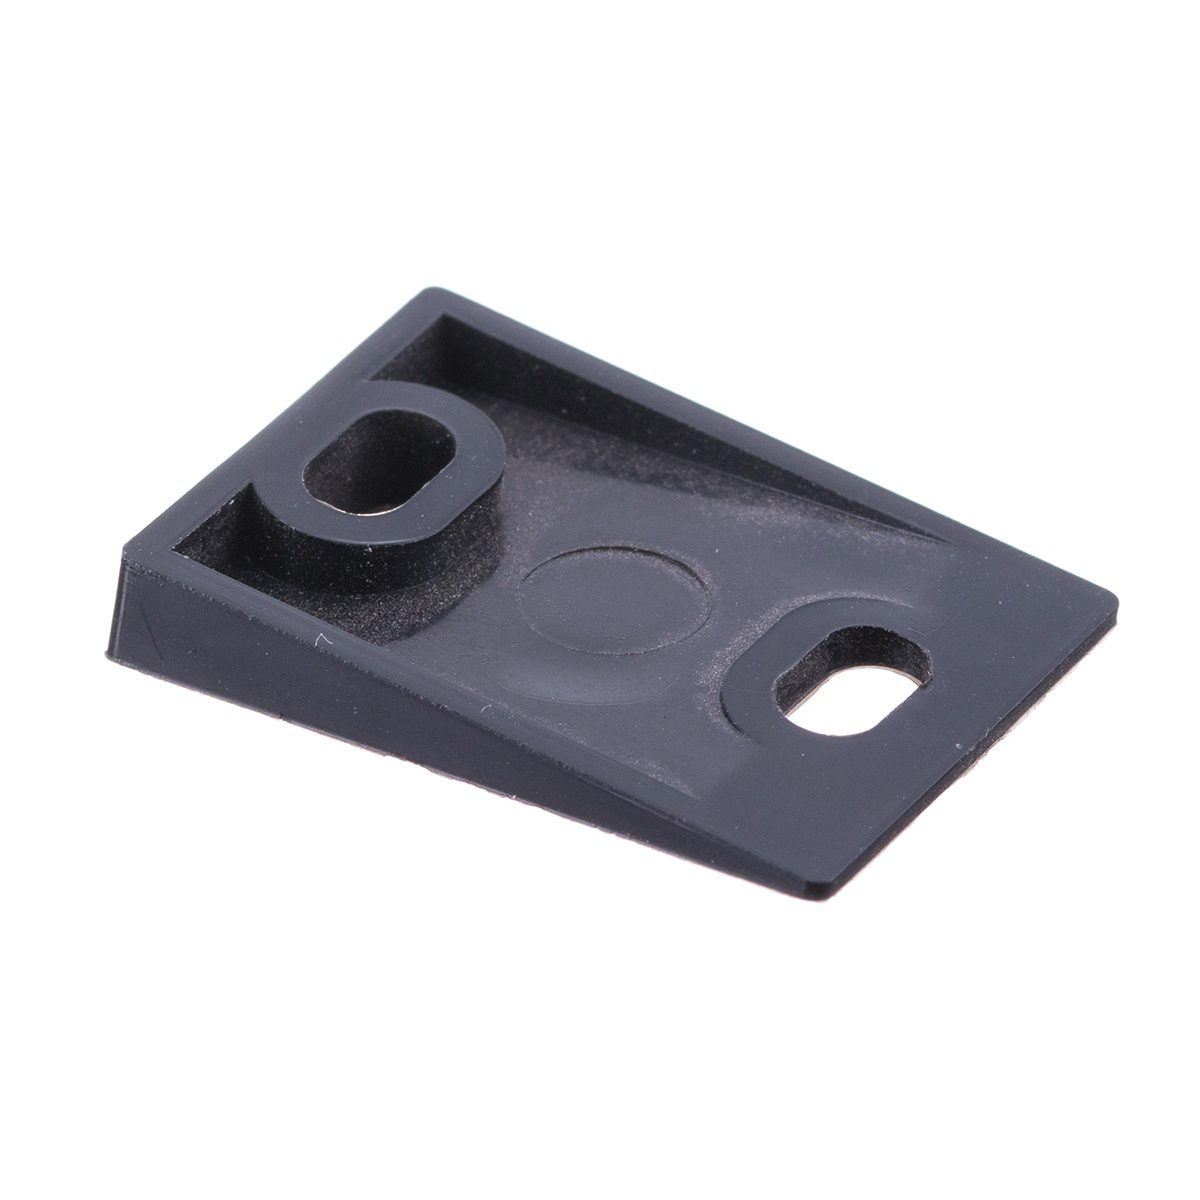 R3599 - Cleat Pad Wedge For R359 (Pk Size: 10)